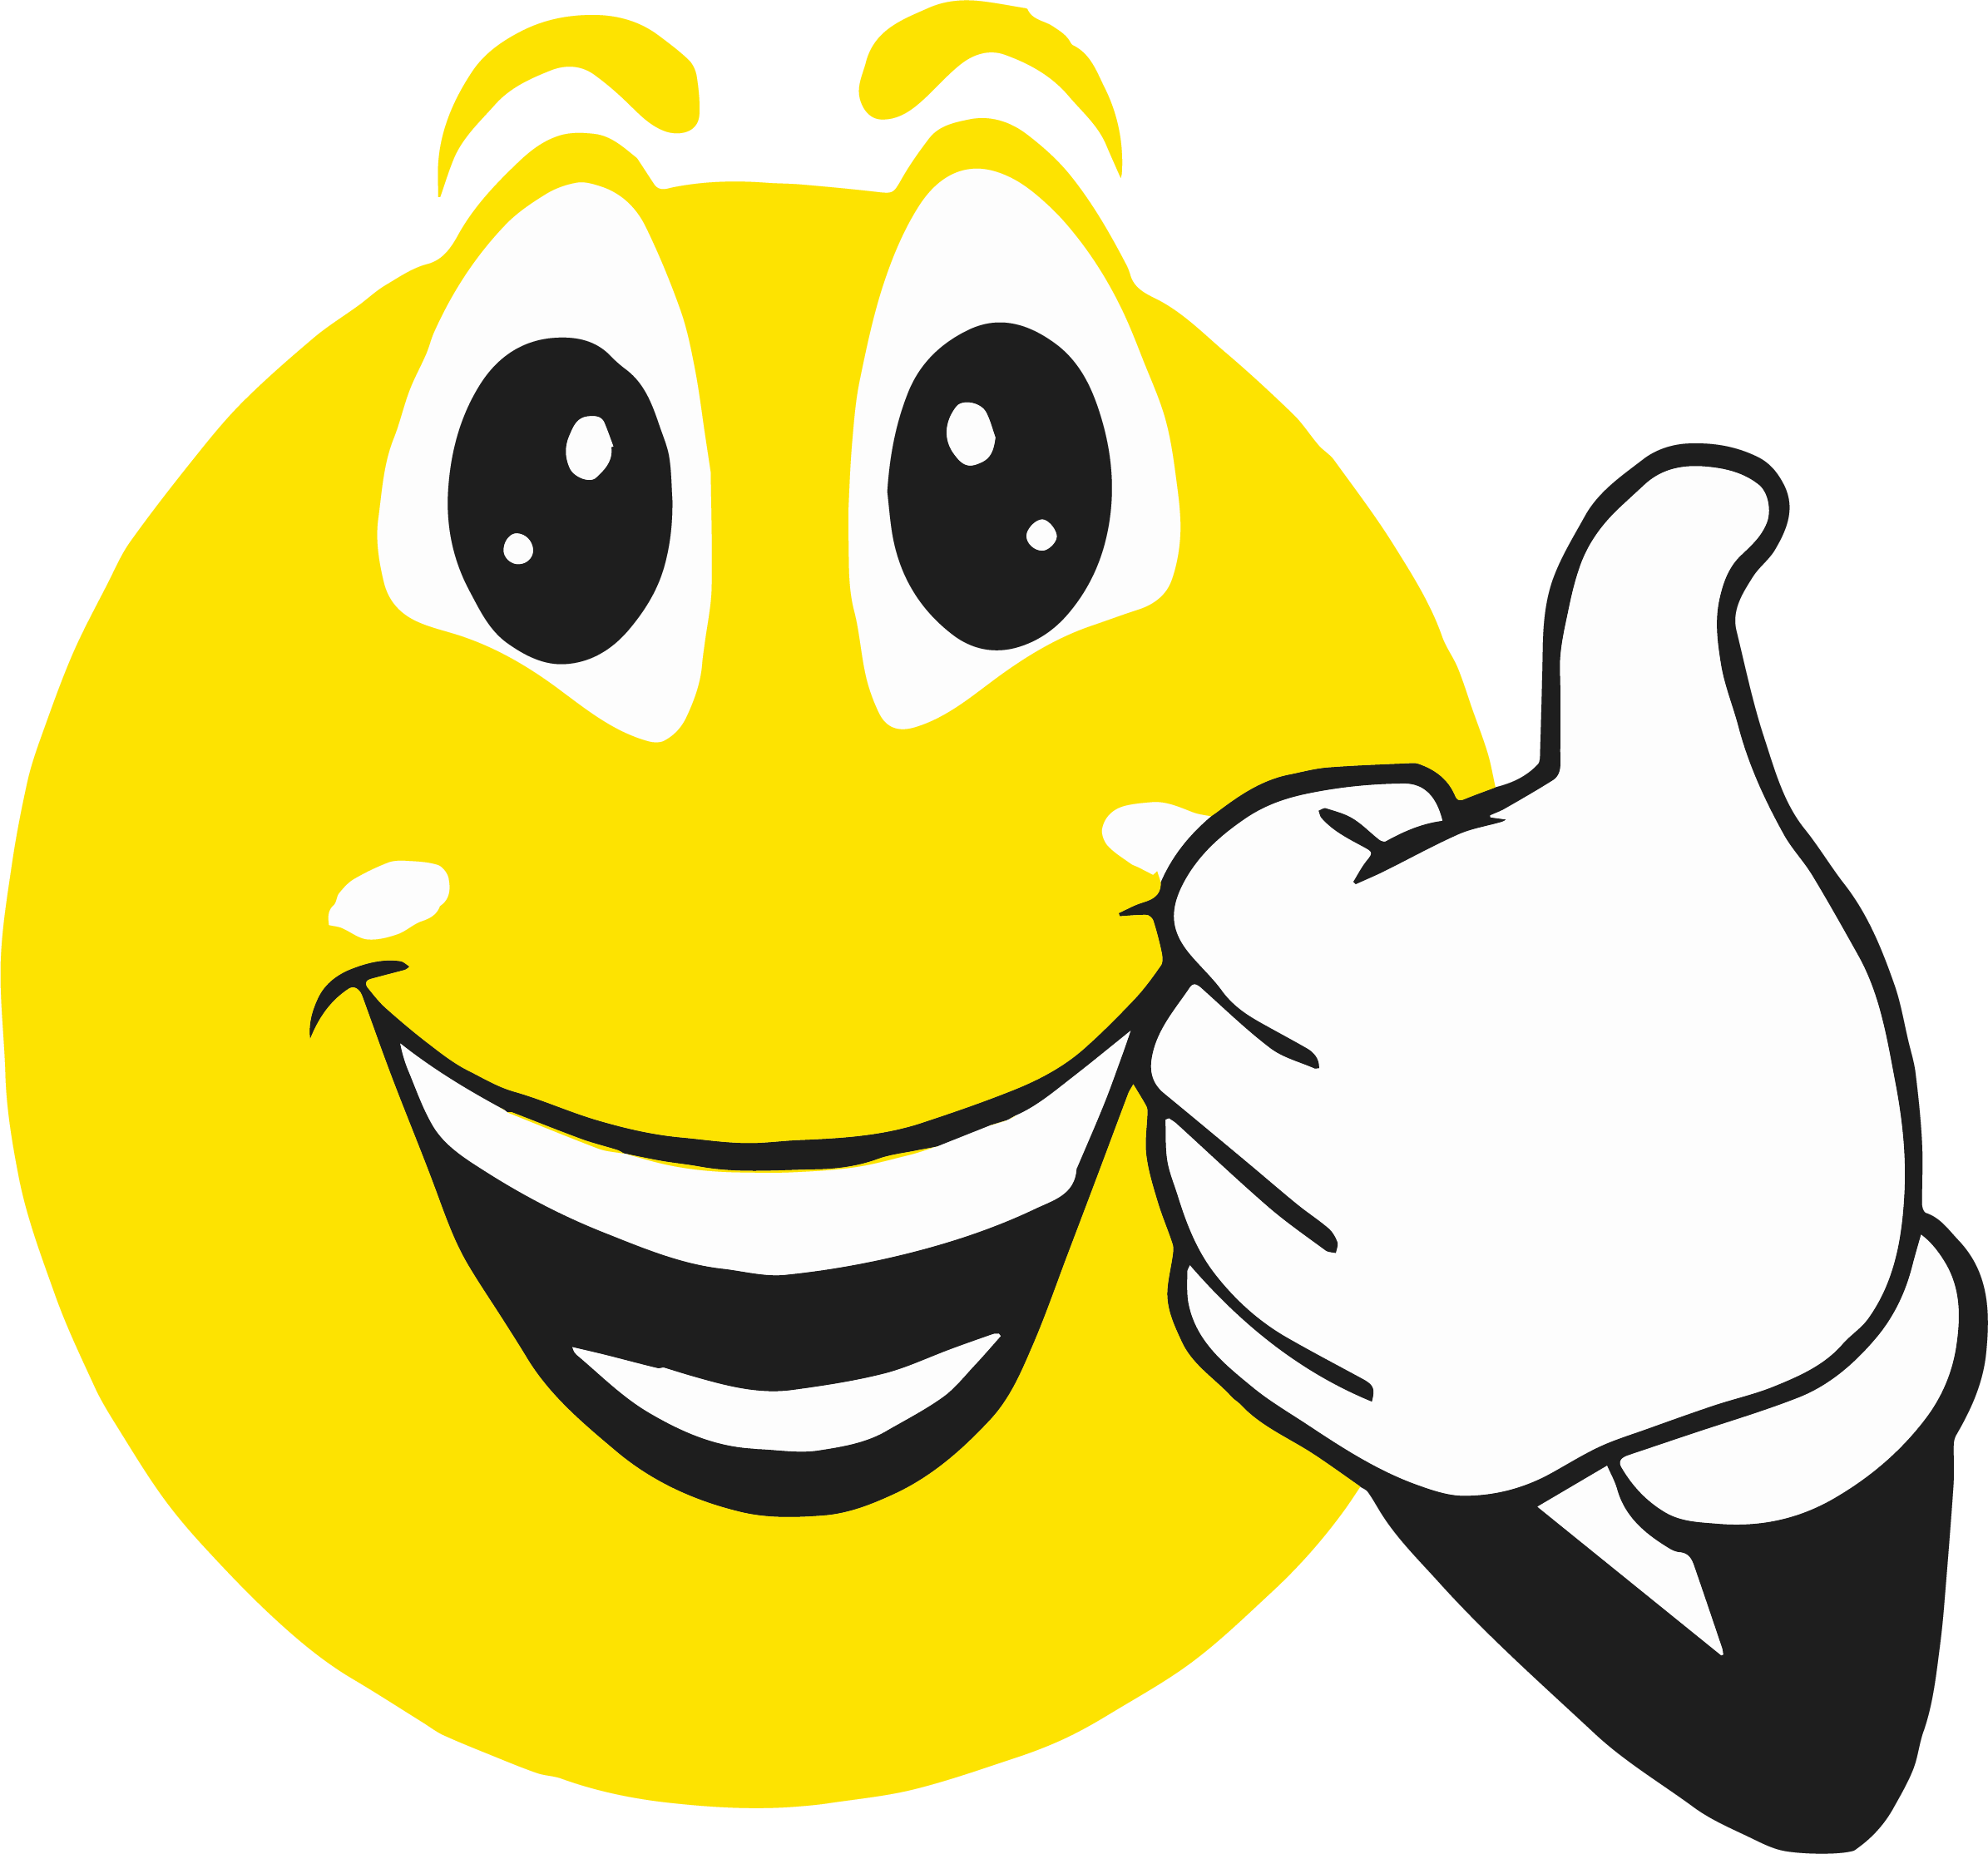 Smiley Face Clip Art Thumbs Up - Smiley Face With Thumbs Up (2390x2229)